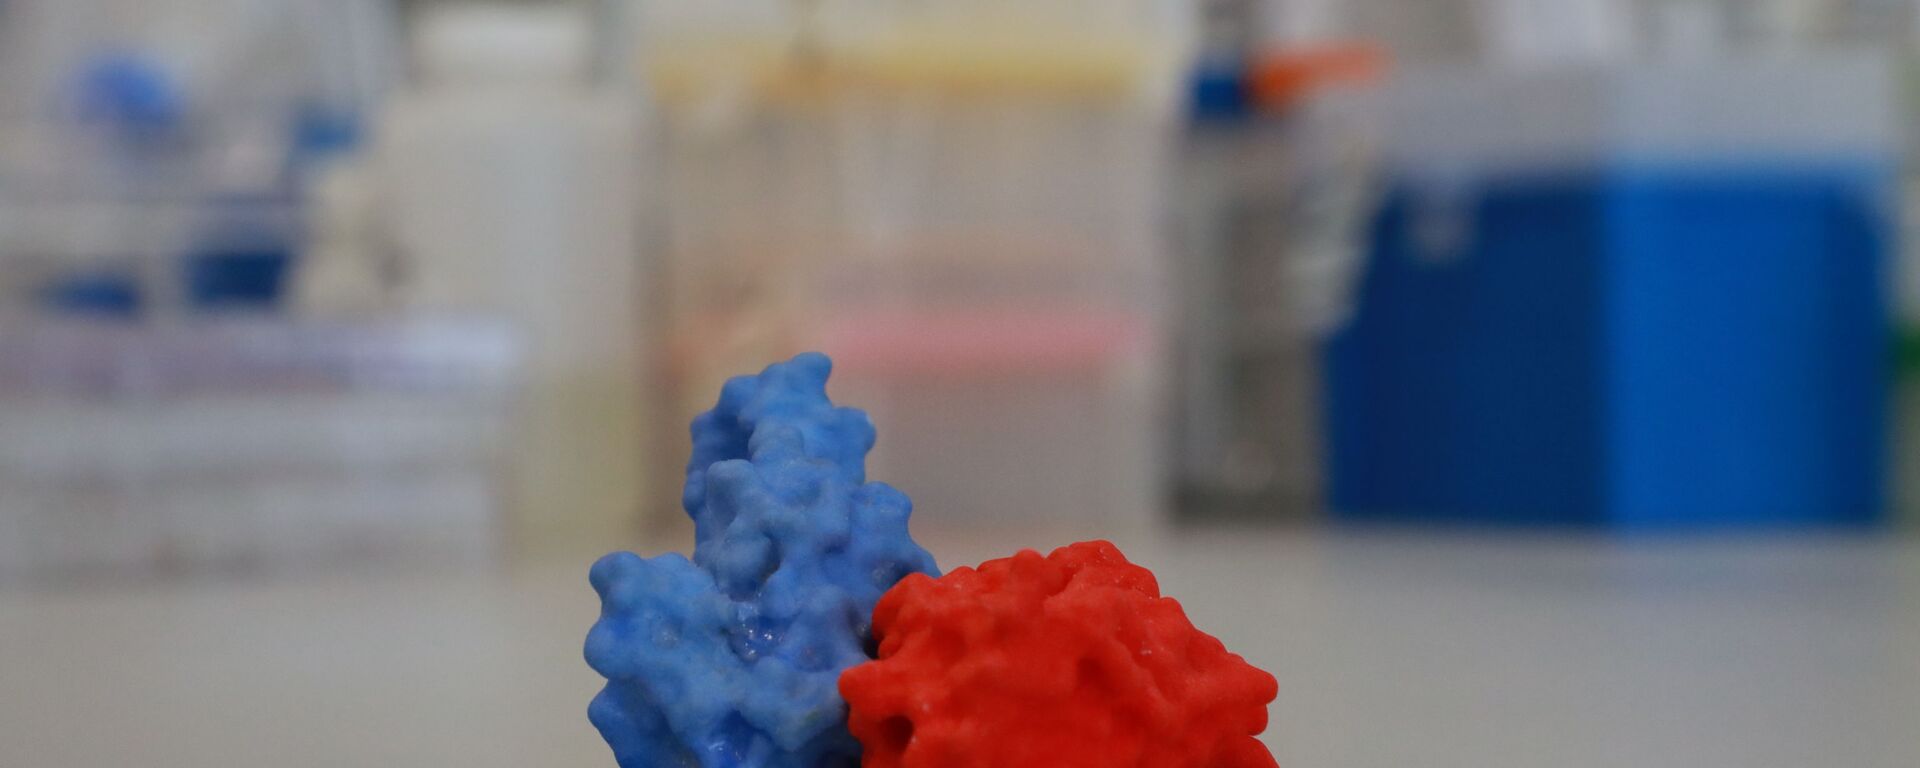 An enlarged 3D model of a spike protein (blue) connected to an antibody (red) sits on a table in VIB-UGent Center, amid the coronavirus disease (COVID-19) pandemic, in Ghent, Belgium August 23, 2021 - Sputnik International, 1920, 09.01.2022